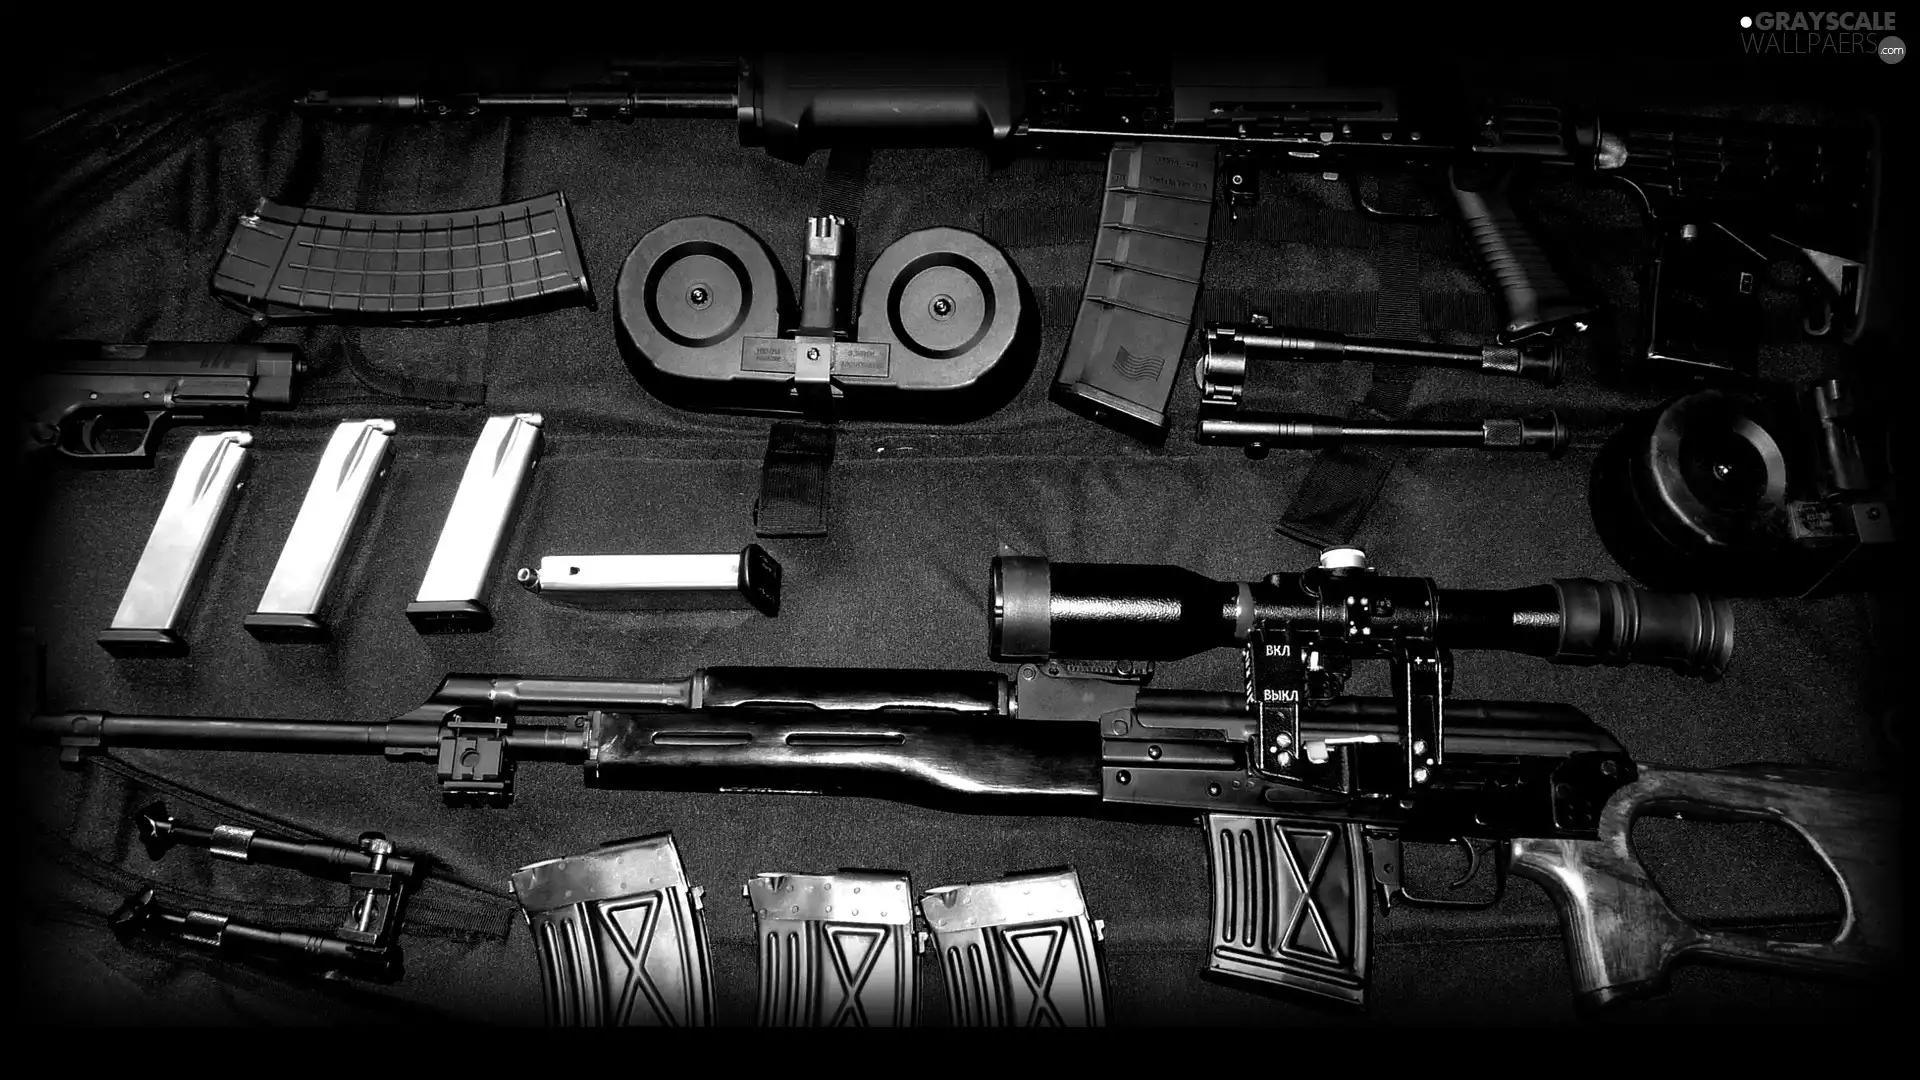 armoury, weapons